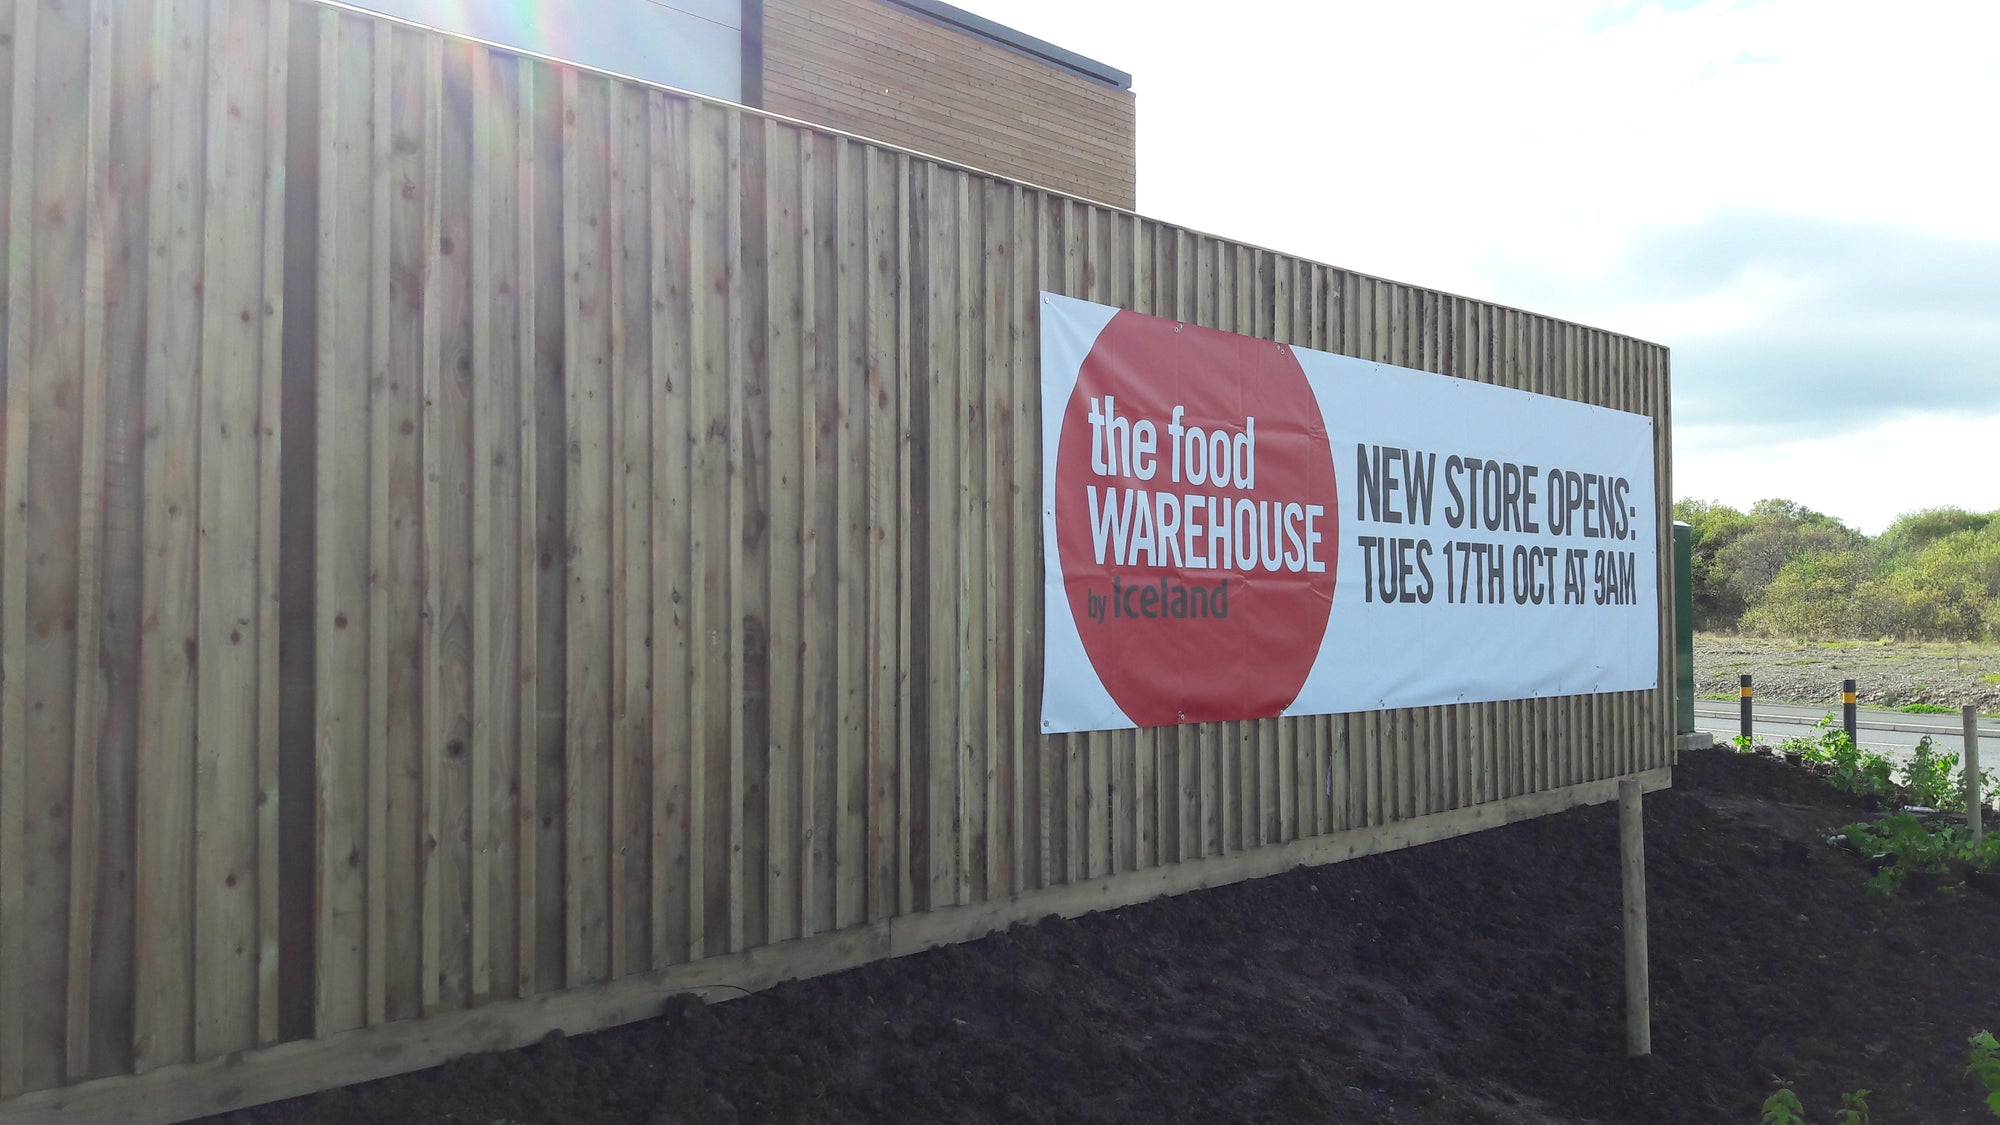 Bespoke timber acoustic fence design installed in a commercial premises